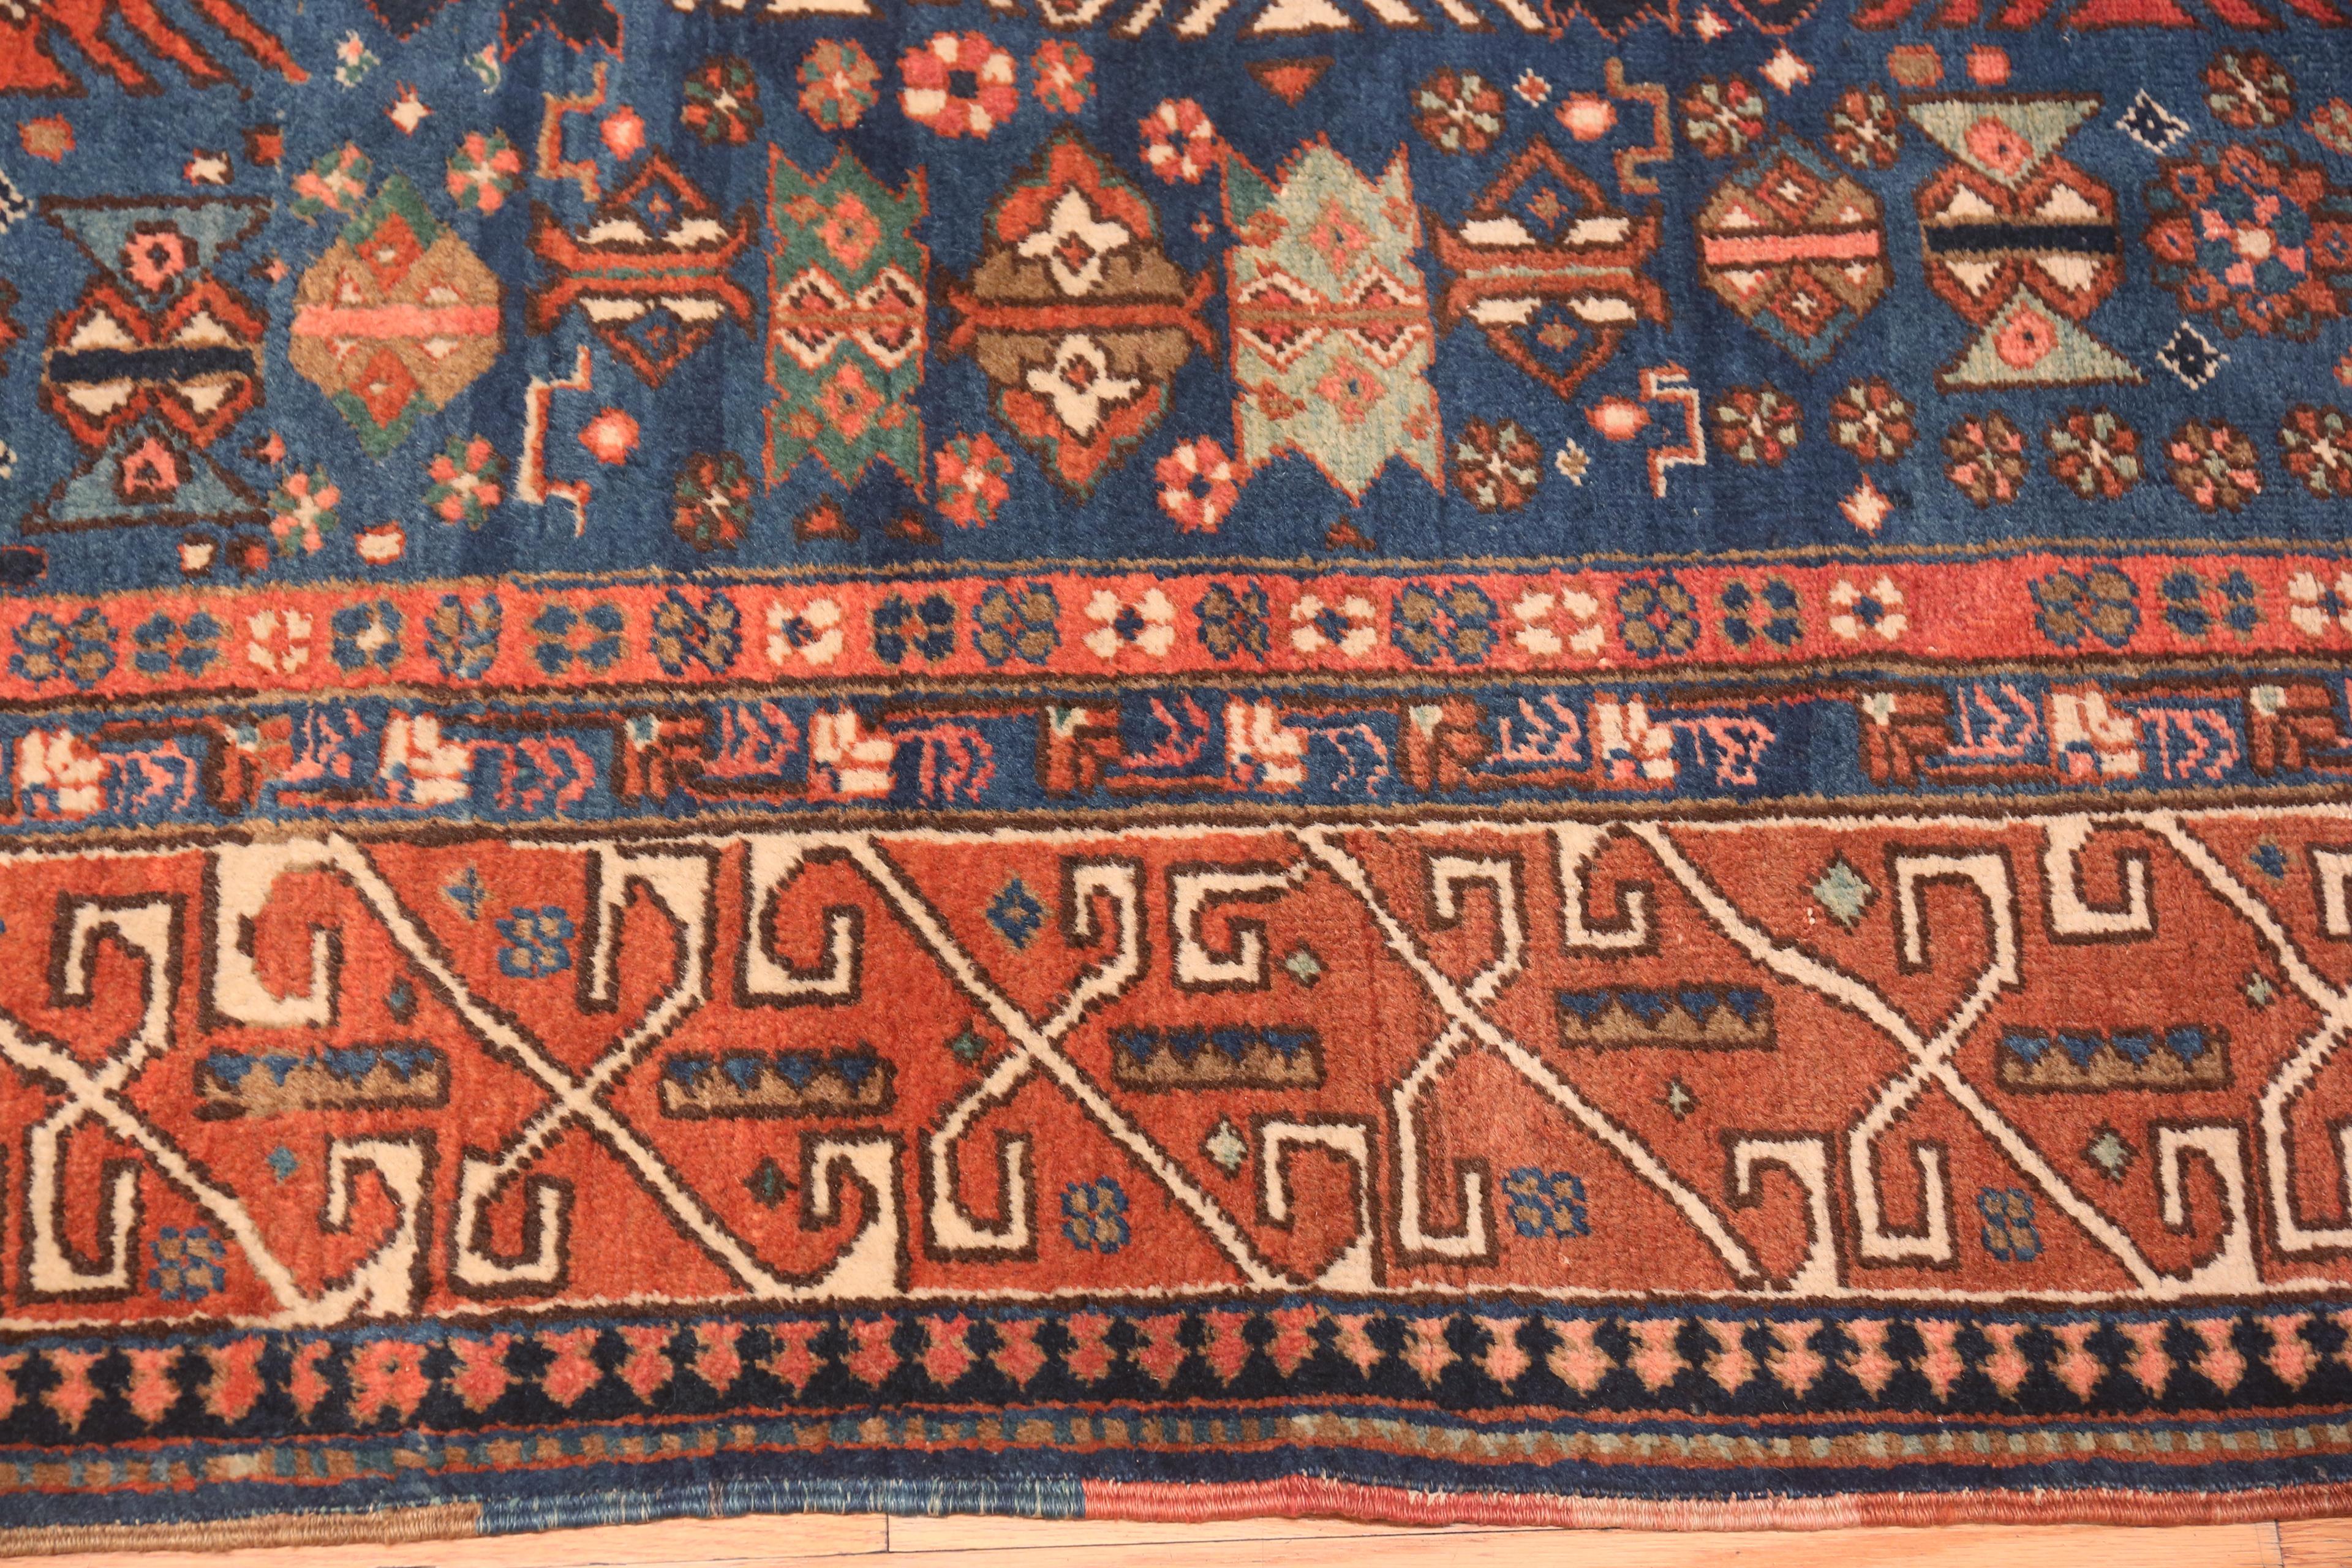 A fine Blue Background Antique Persian Heriz Rug, country of origin / rug type: antique Persian rugs, date circa 1920. Size: 6 ft 8 in x 9 ft 8 in (2.03 m x 2.95 m)

